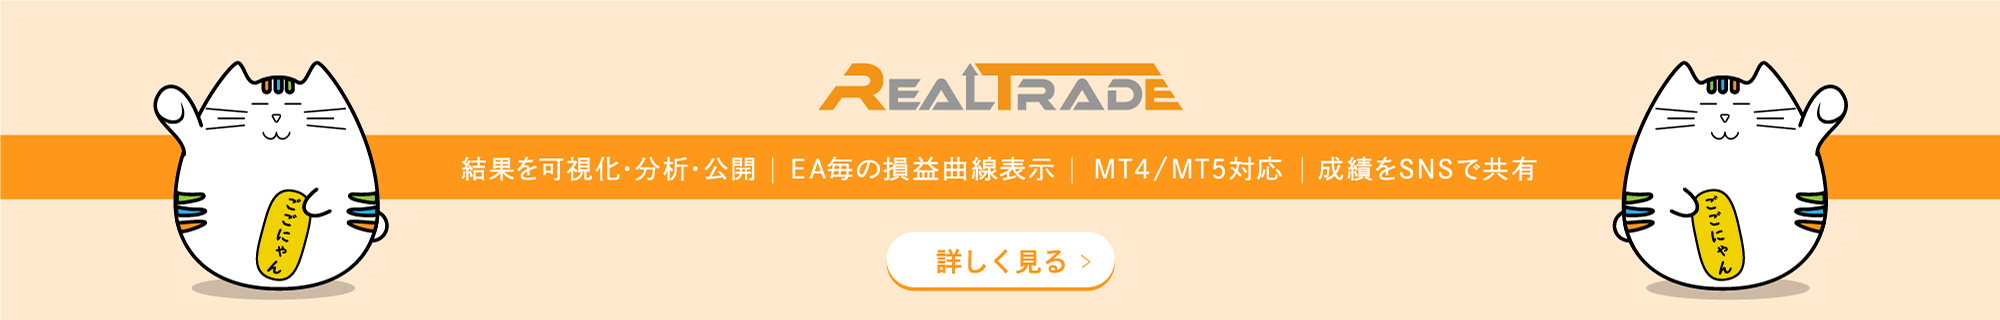 Real Trade banner